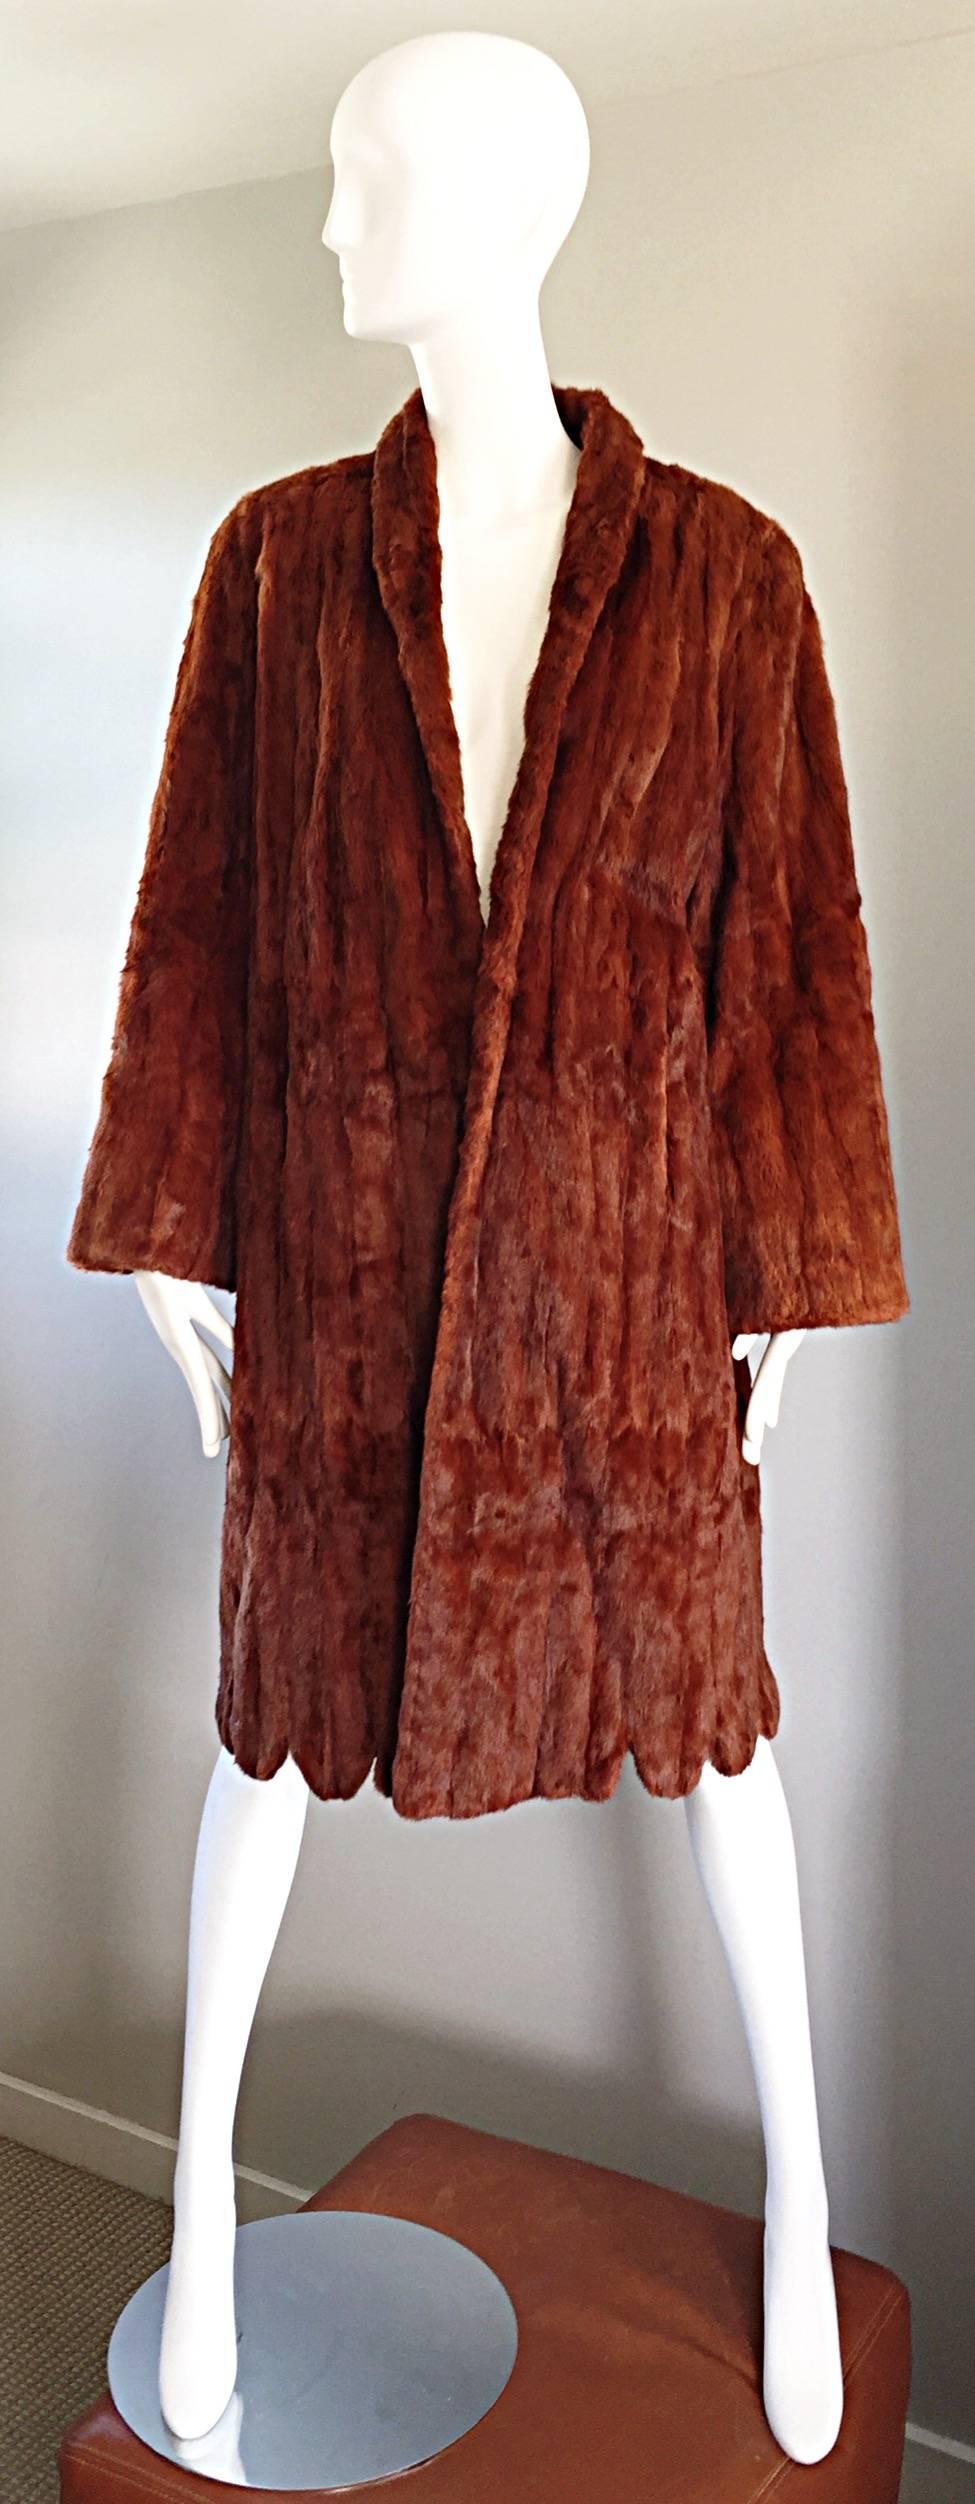 Wonderful and hard to find summer ermine fur (cousin to th mink) jacket coat! Ermines are white during the winter months (to blend in with the snow), and transform into this beautiful honey brown red color during the three short summer months, thus